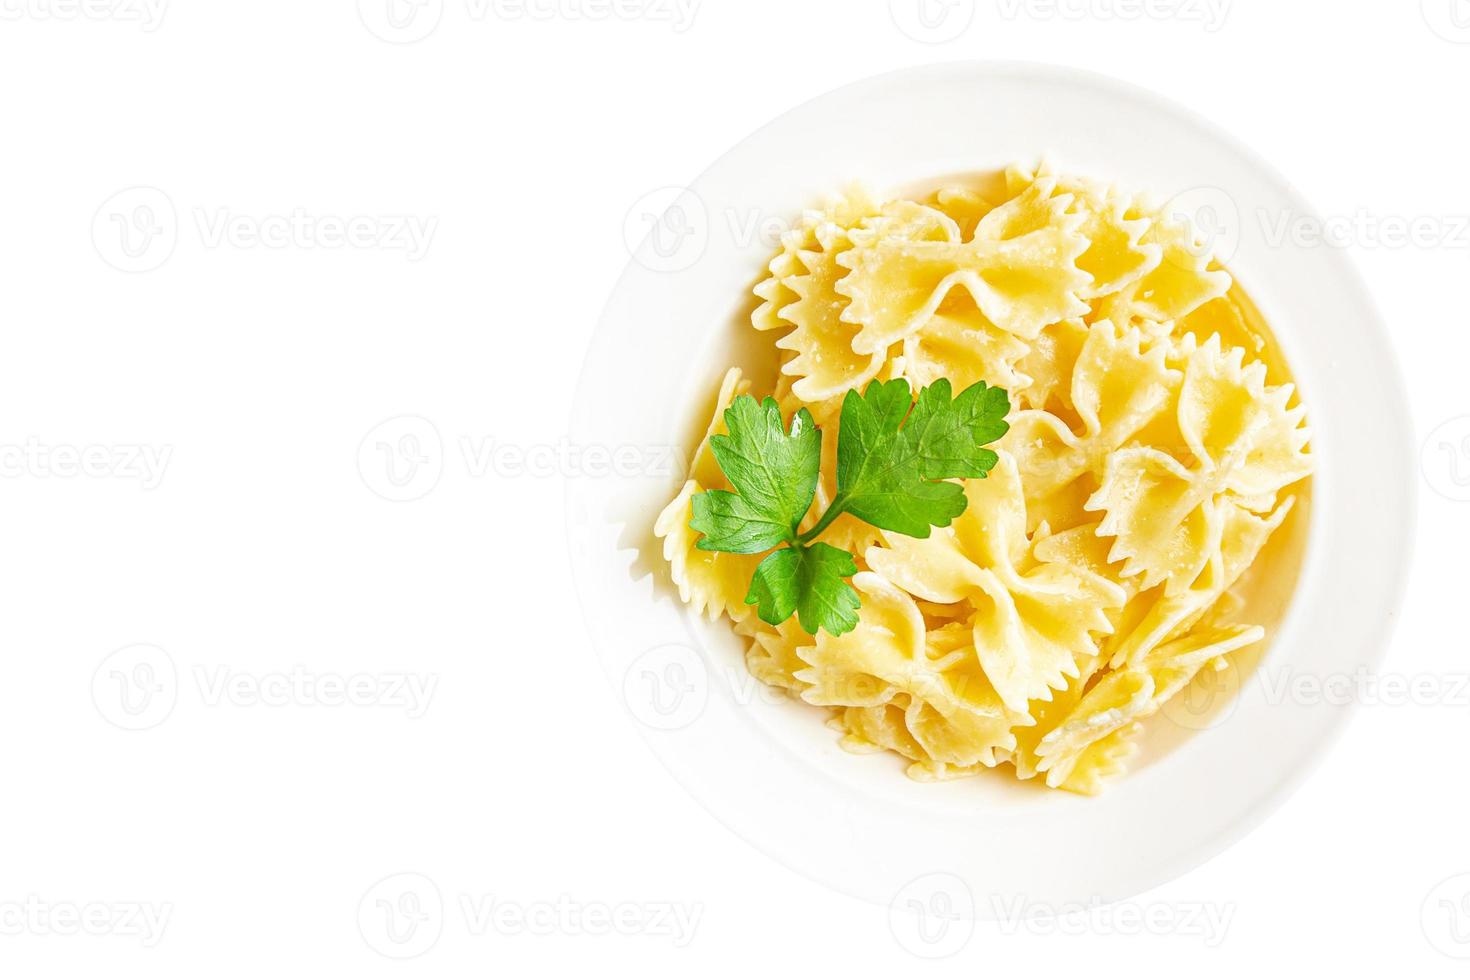 farfalle pasta ready to eat healthy meal food background photo